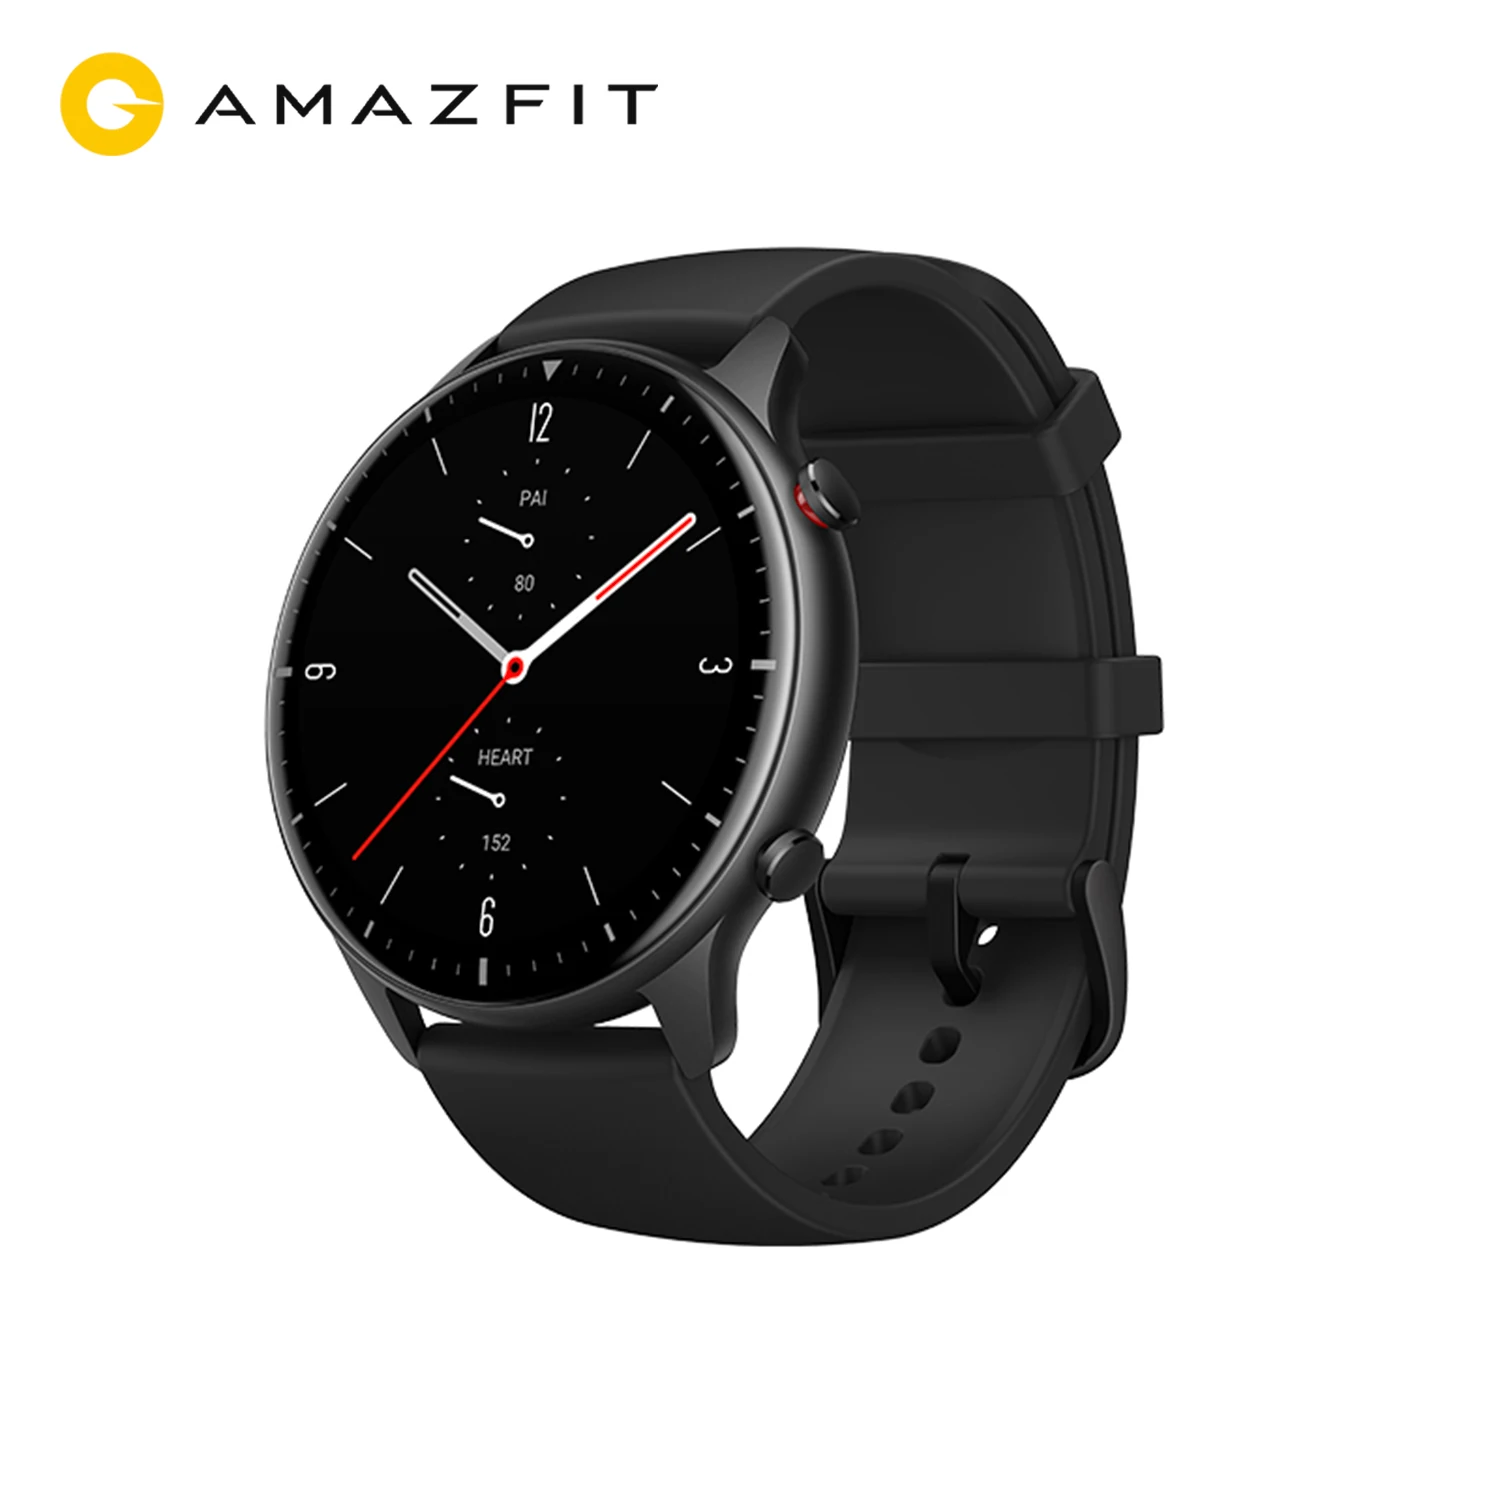 Permalink to Amazfit GTR 2 12 Sports Modes Smart Watch Fitness Watch Answer Calls Alexa Built-in Sleep Monitoring Smartwatch For Android iOS